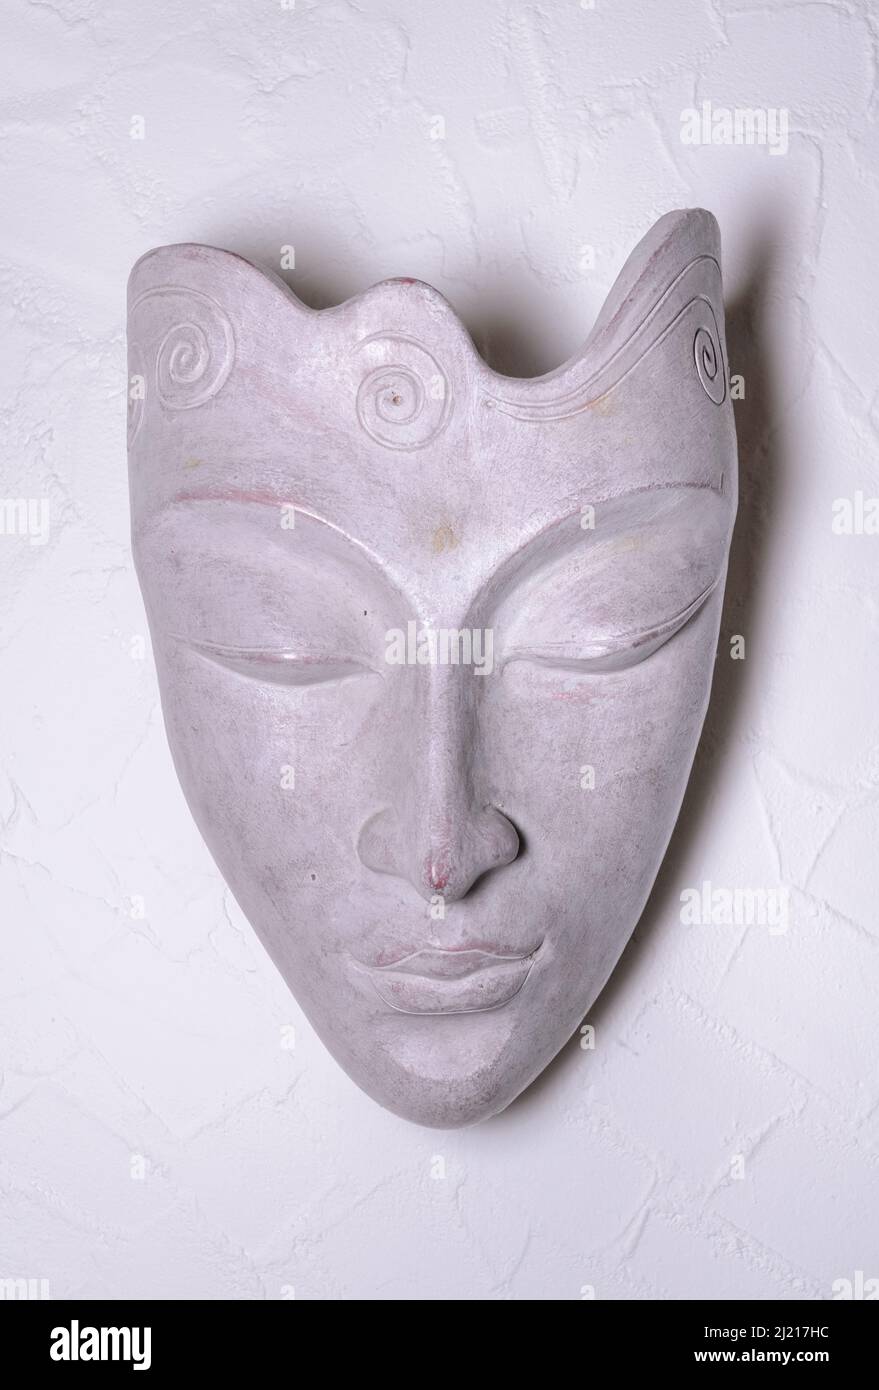 Decorative asian or oriental face mask made of grey stone on a white wall, front view Stock Photo